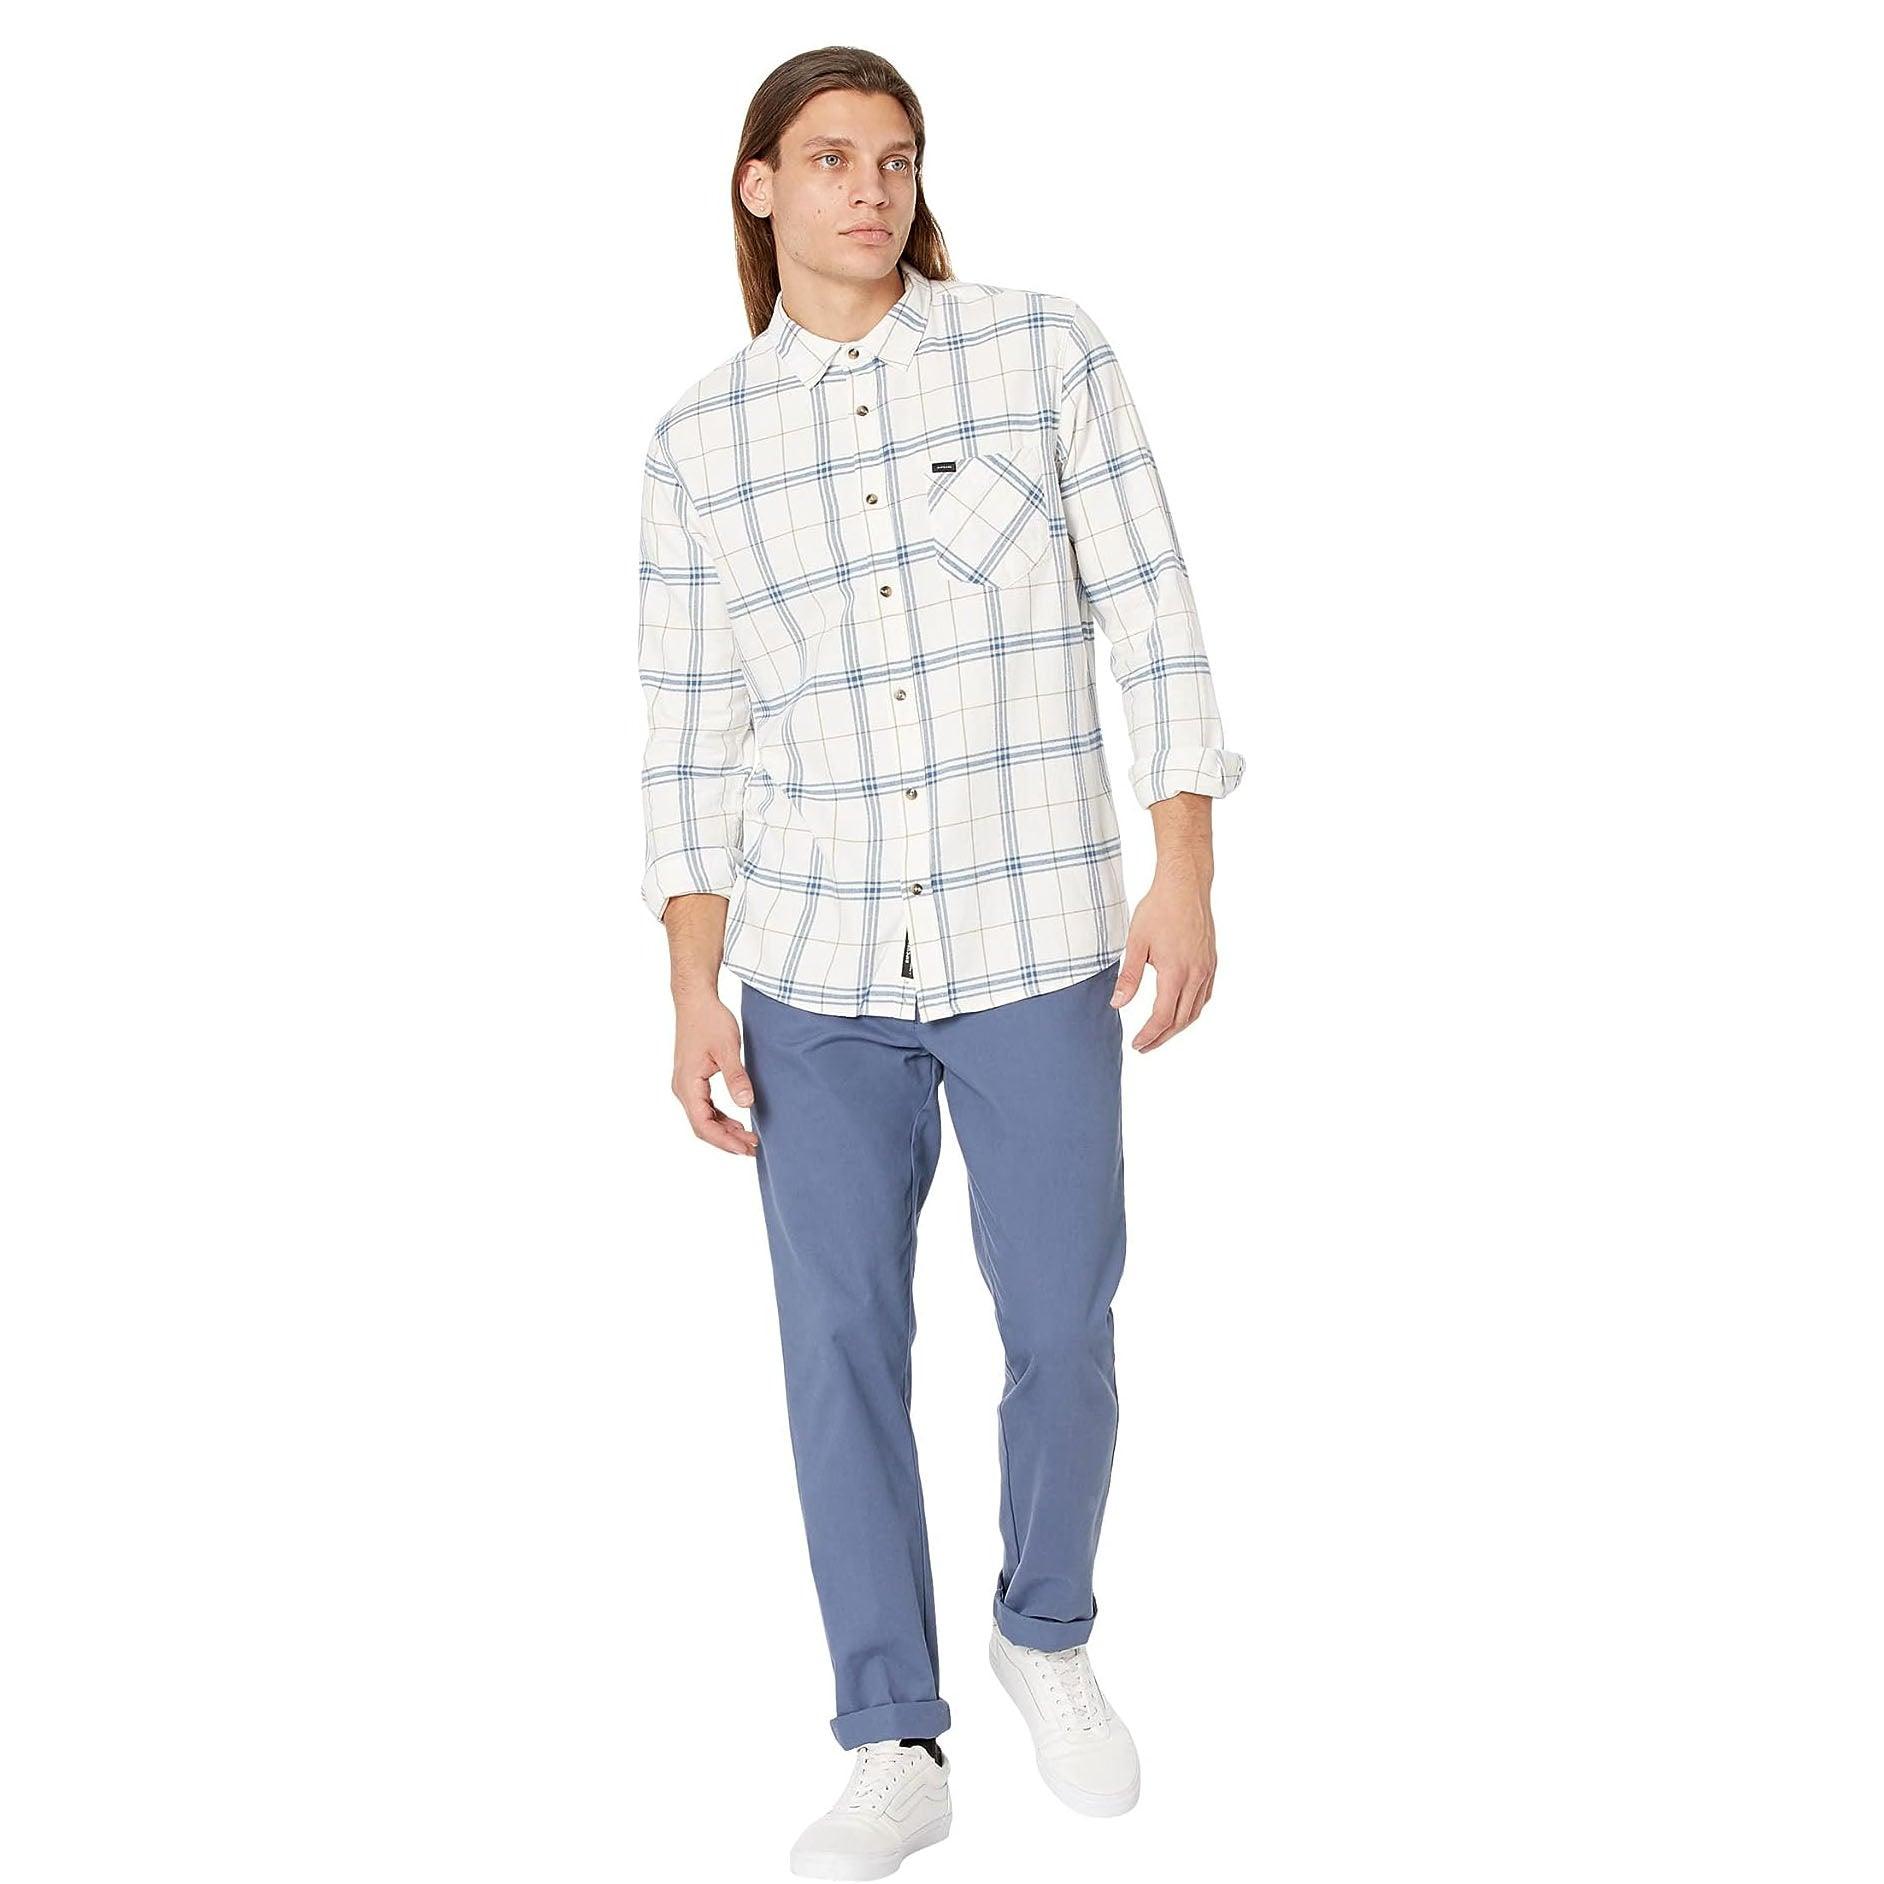 Camisa Rip Curl Flannel Check Blanco - Indy